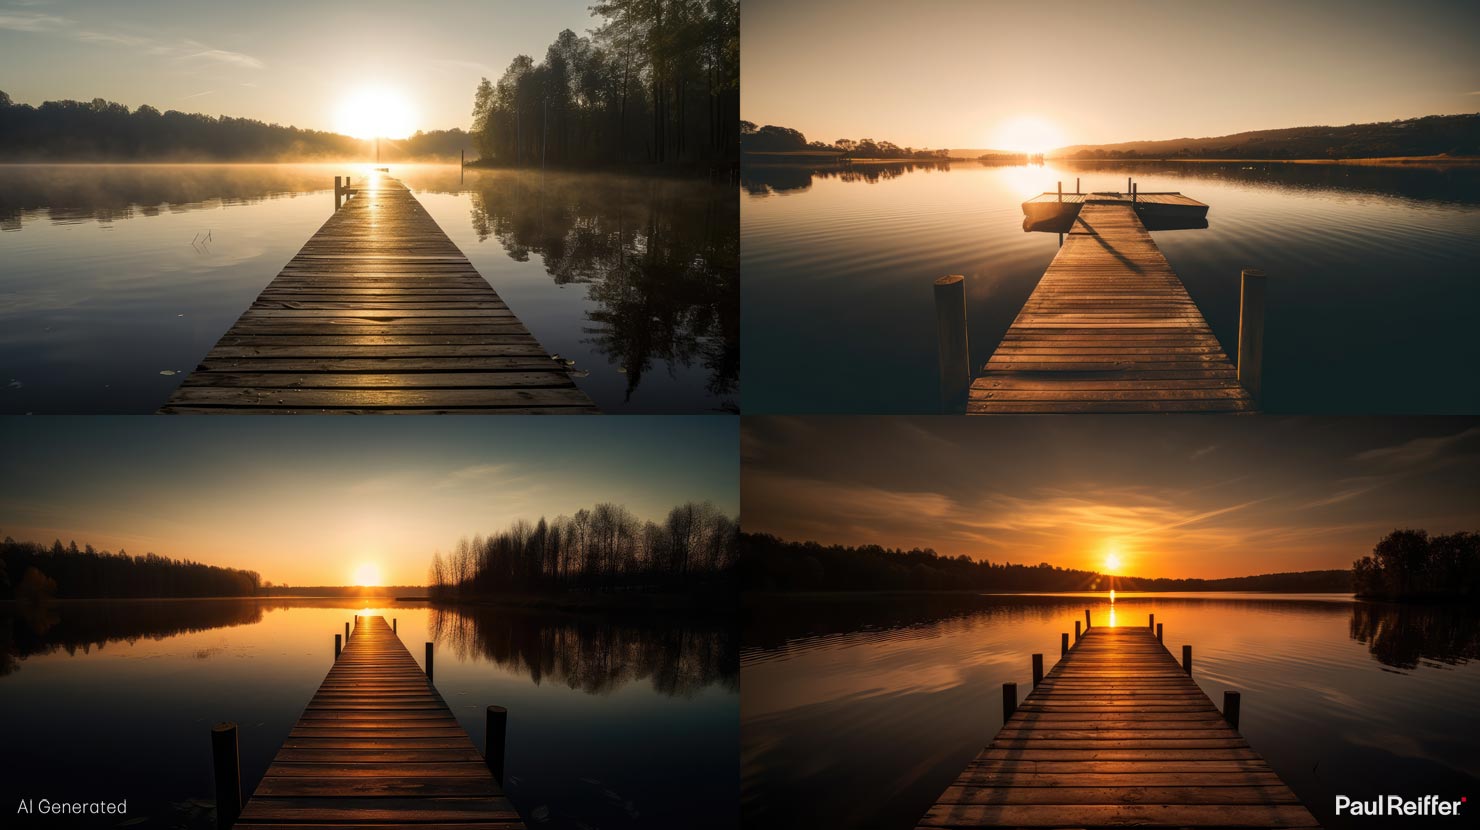 Sunset Jetty 2 Options Variants Photography Realistic Discord MidJourney Photographers Landscape How To Use AI Images Good Bad Review Bard Bing ChatGPT Guide Paul Reiffer